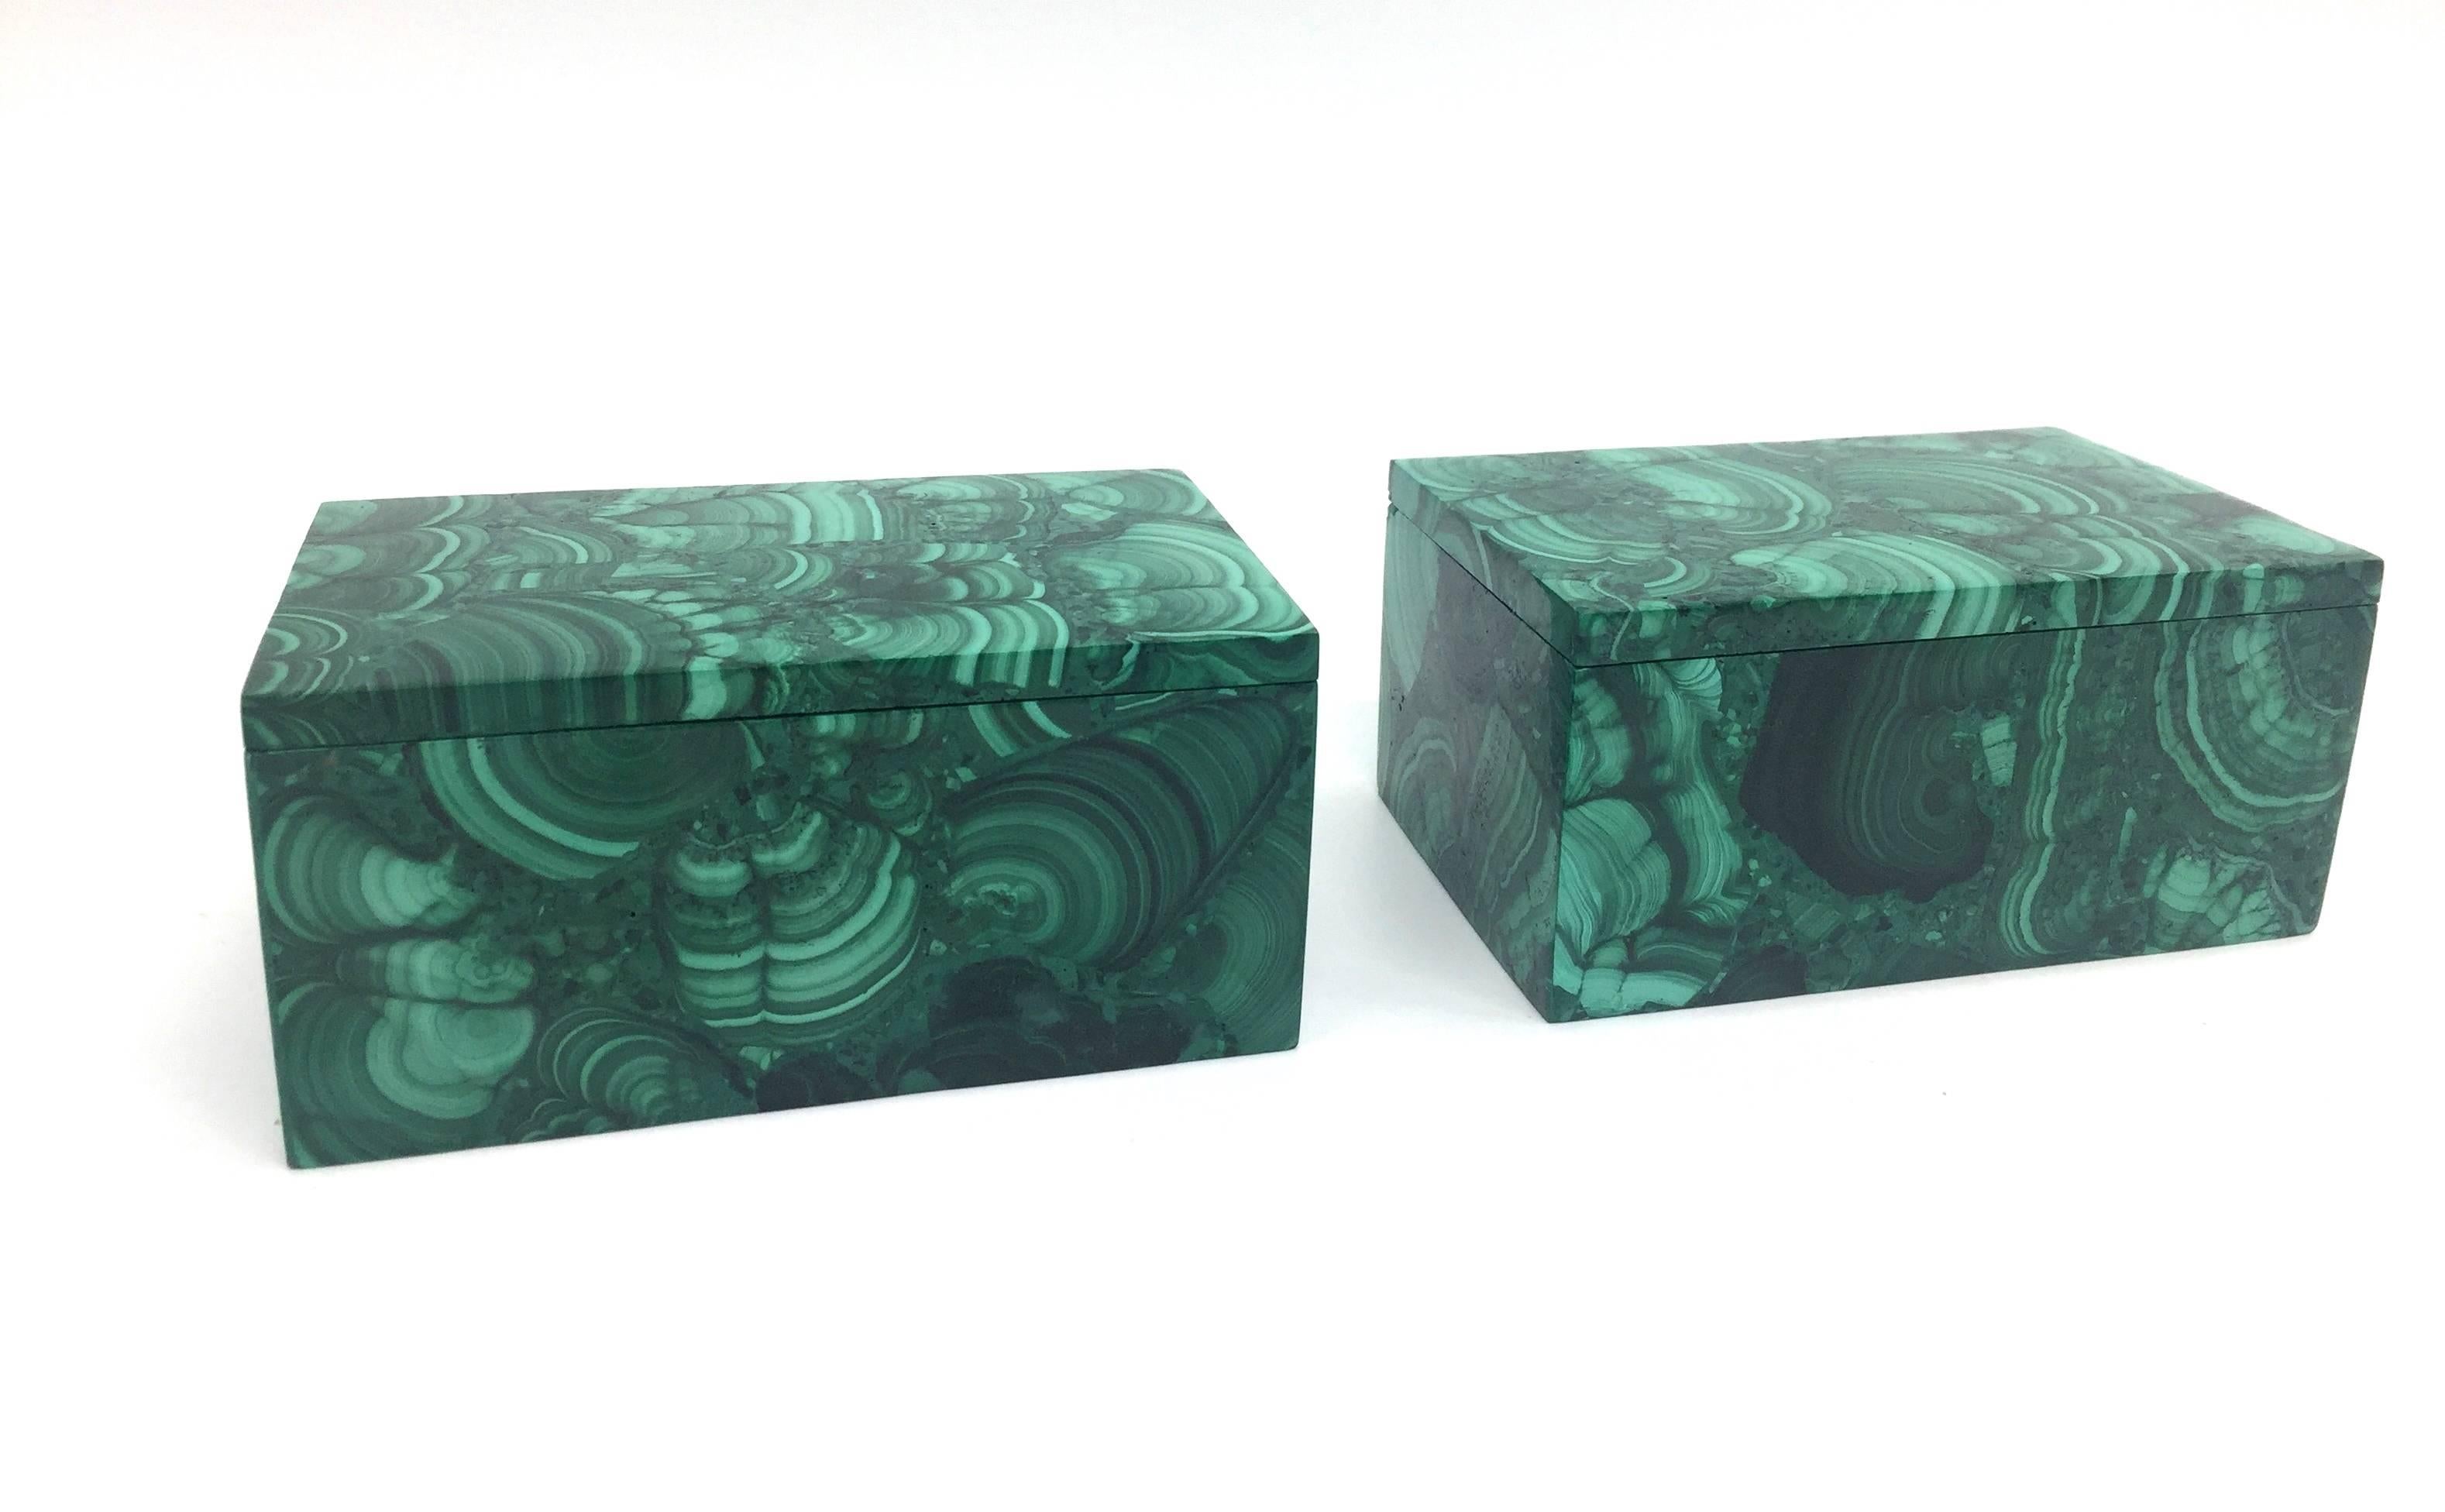 Hand-Crafted Pair of Natural Malachite Boxes, Handcrafted Jewelry Boxes